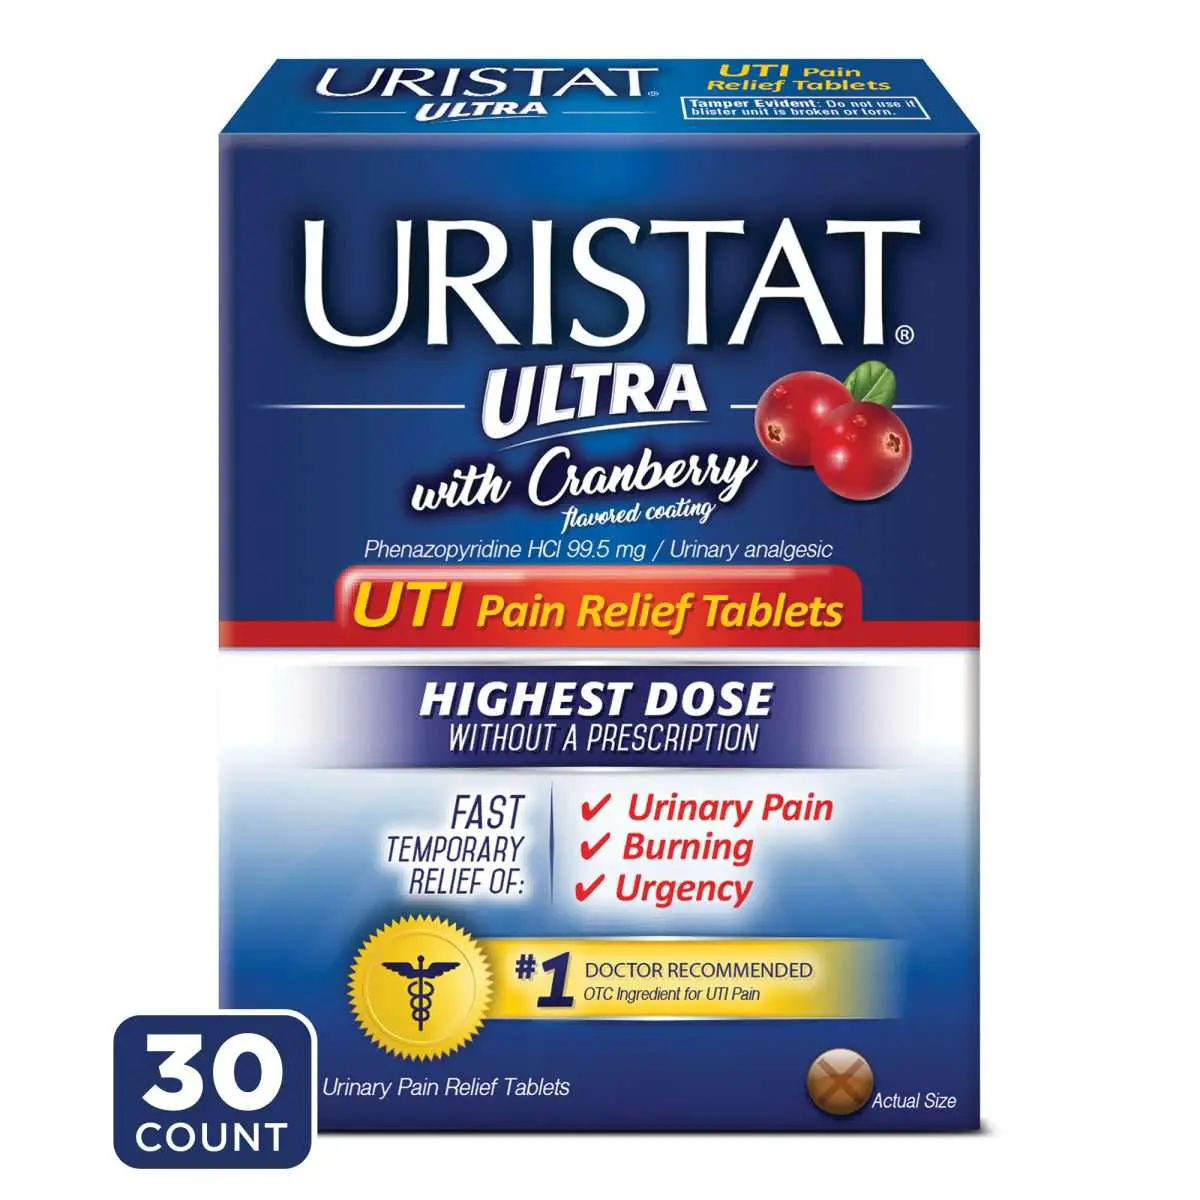 URISTAT Ultra UTI Pain Relief, Cranberry Flavored Coating, 30 Tablets ...